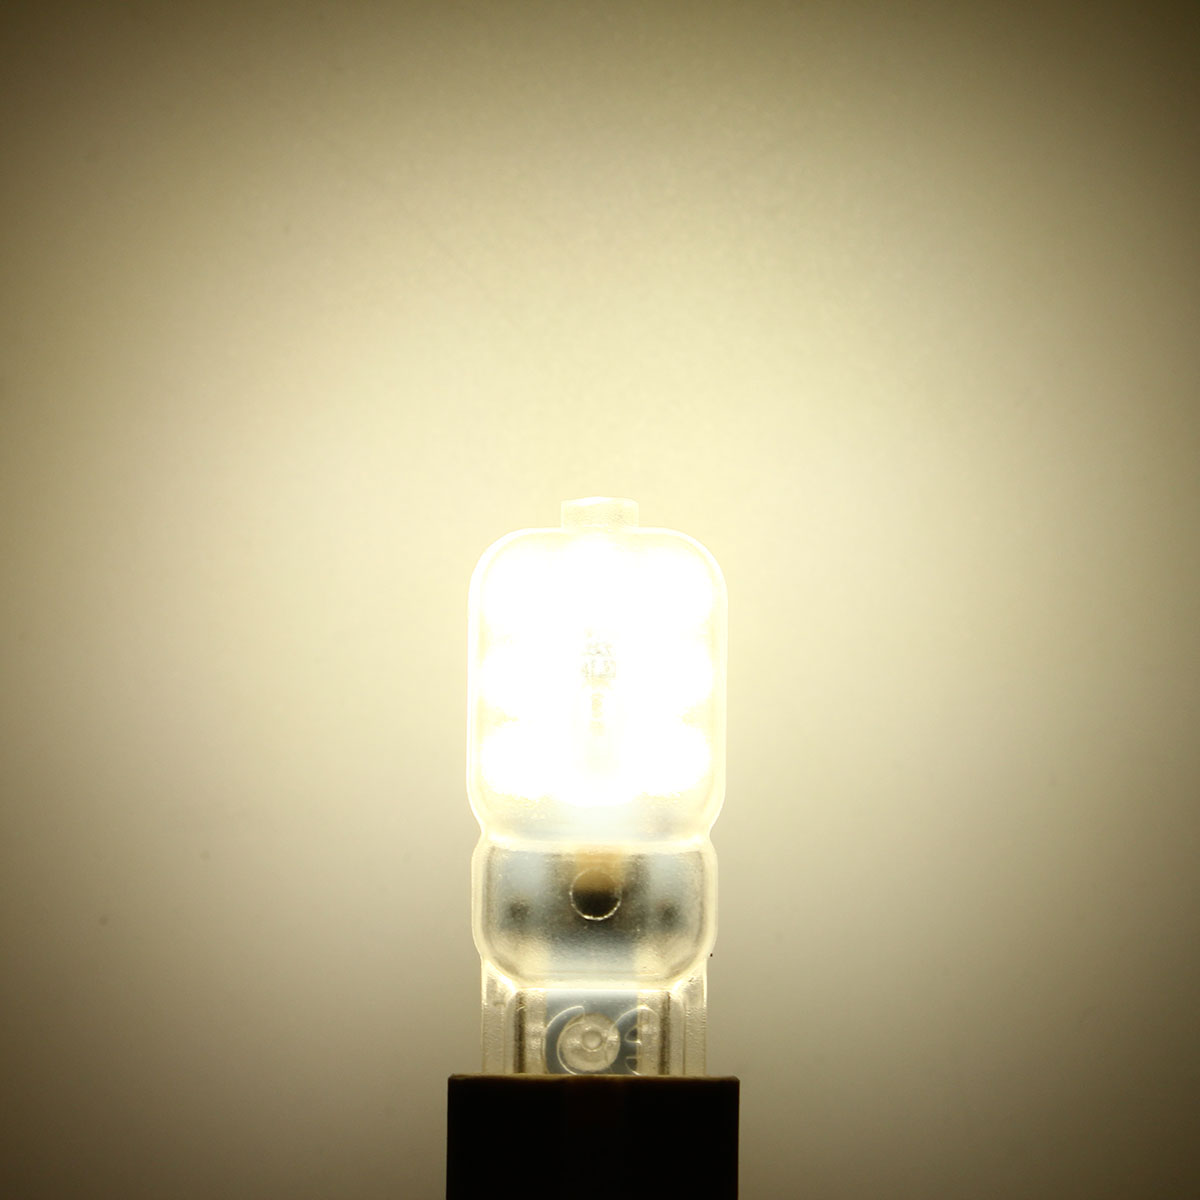 Dimmable-G9-25W-14-SMD-2835-LED-Pure-White-Warm-White-Natural-White-Light-Lamp-Bulb-AC110VAC220V-1073443-6